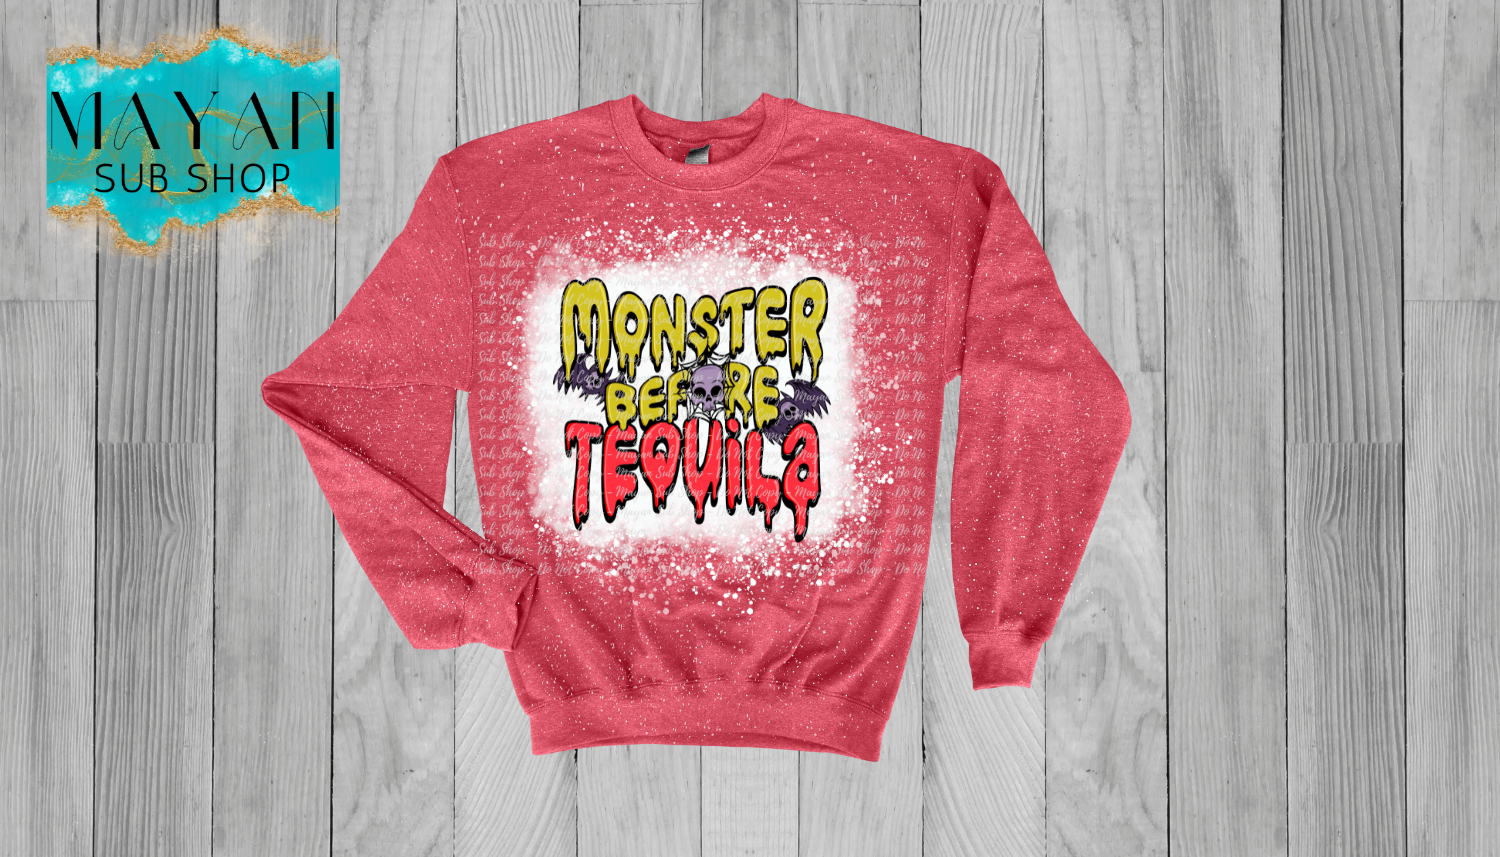 Monster before tequila heather red bleached sweatshirt. -Mayan Sub Shop